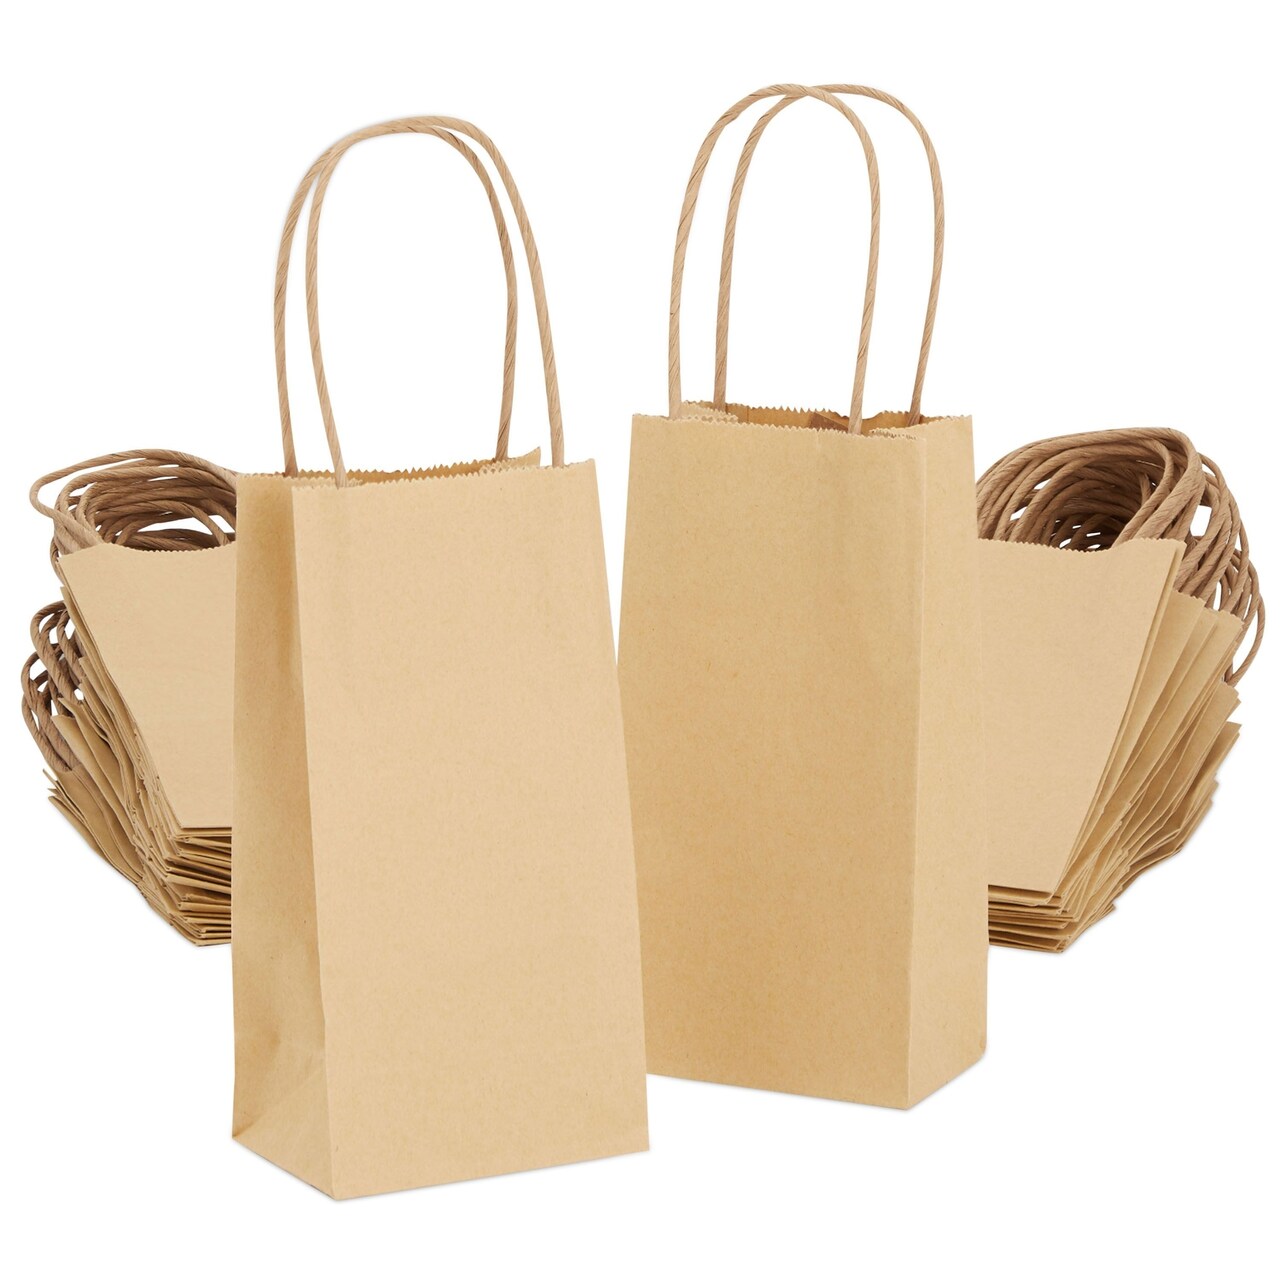 50 Pack Small Gift Bags with Handles, 6.2 x 3.5 x 2.4 Inch Bulk Kraft Paper Goodie Bags for Party Favors, Birthday, Retail, Small Business, Arts and Crafts, DIY Projects